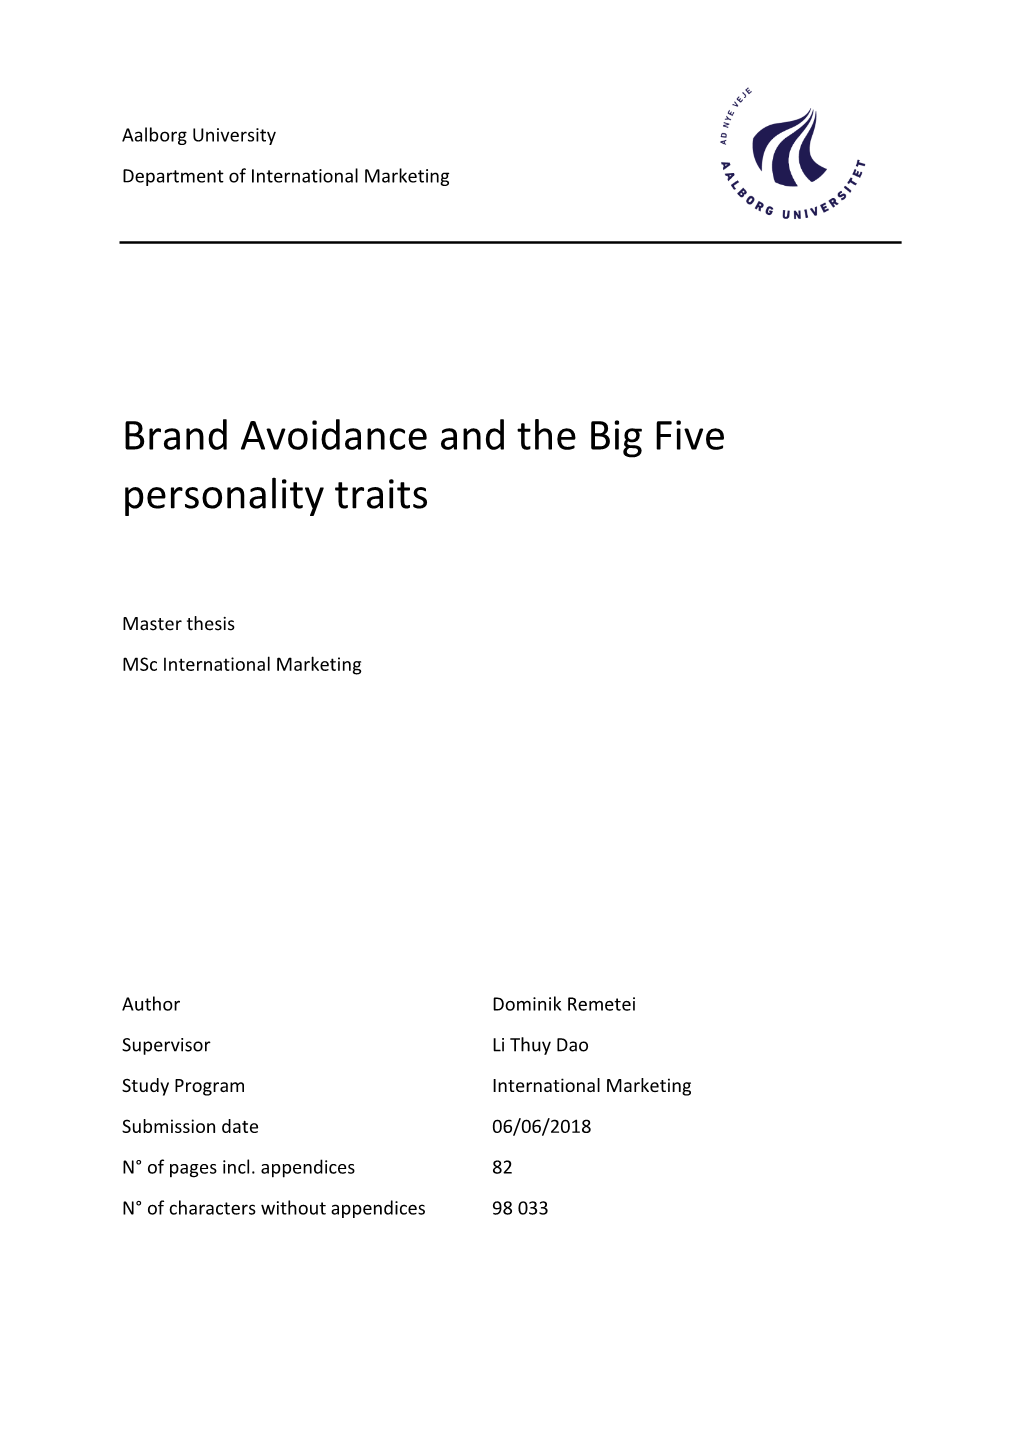 Brand Avoidance and the Big Five Personality Traits